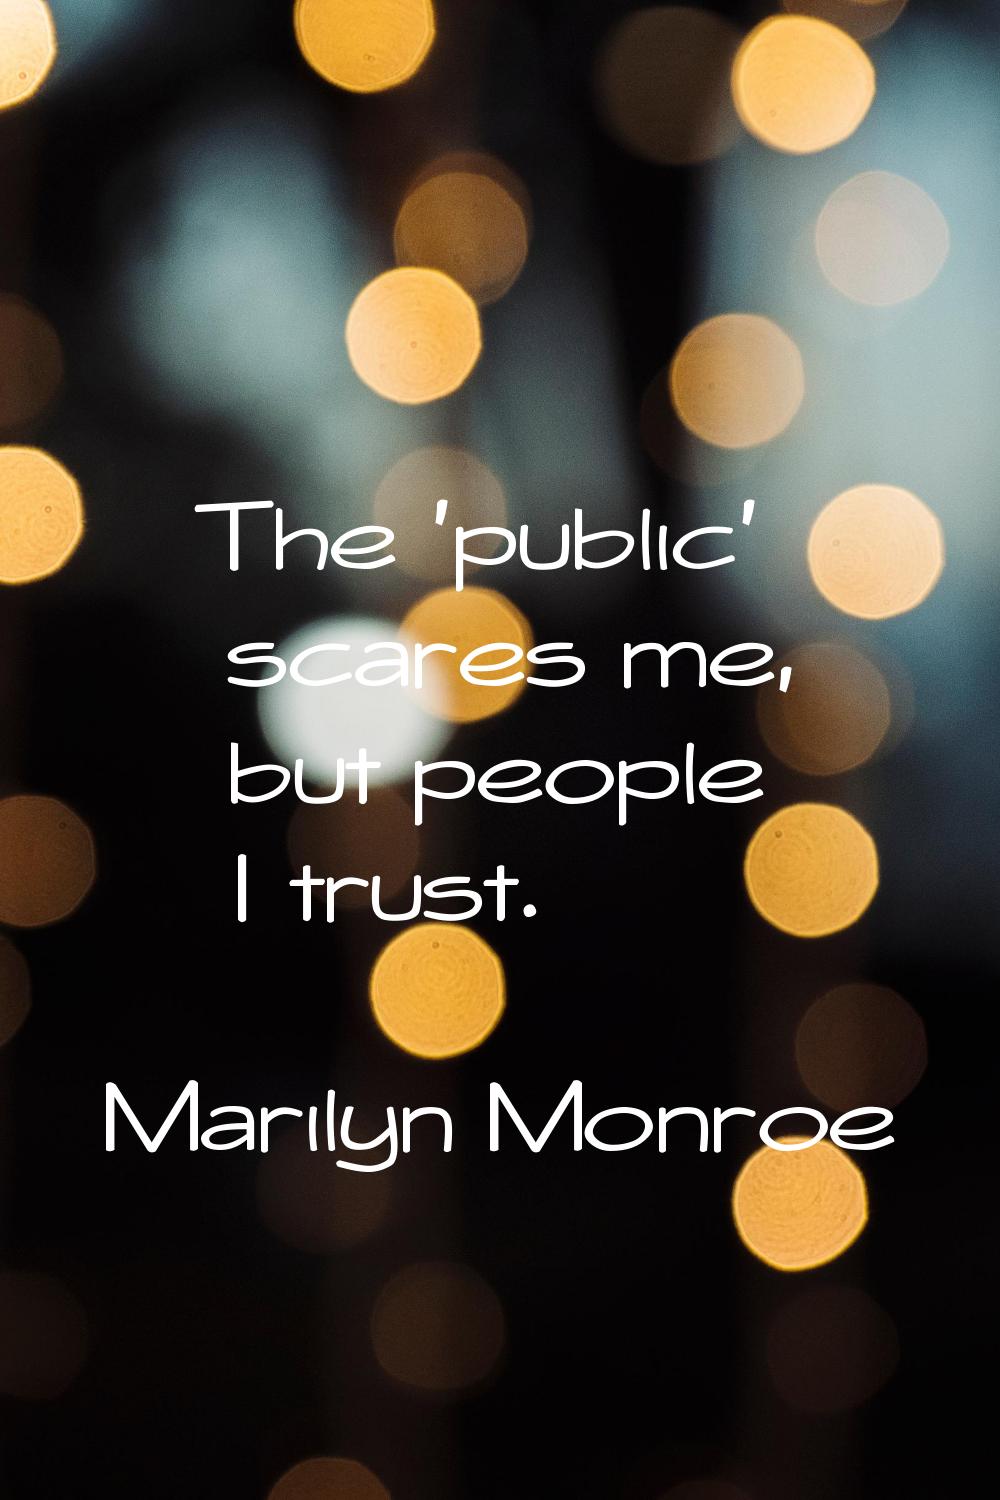 The 'public' scares me, but people I trust.